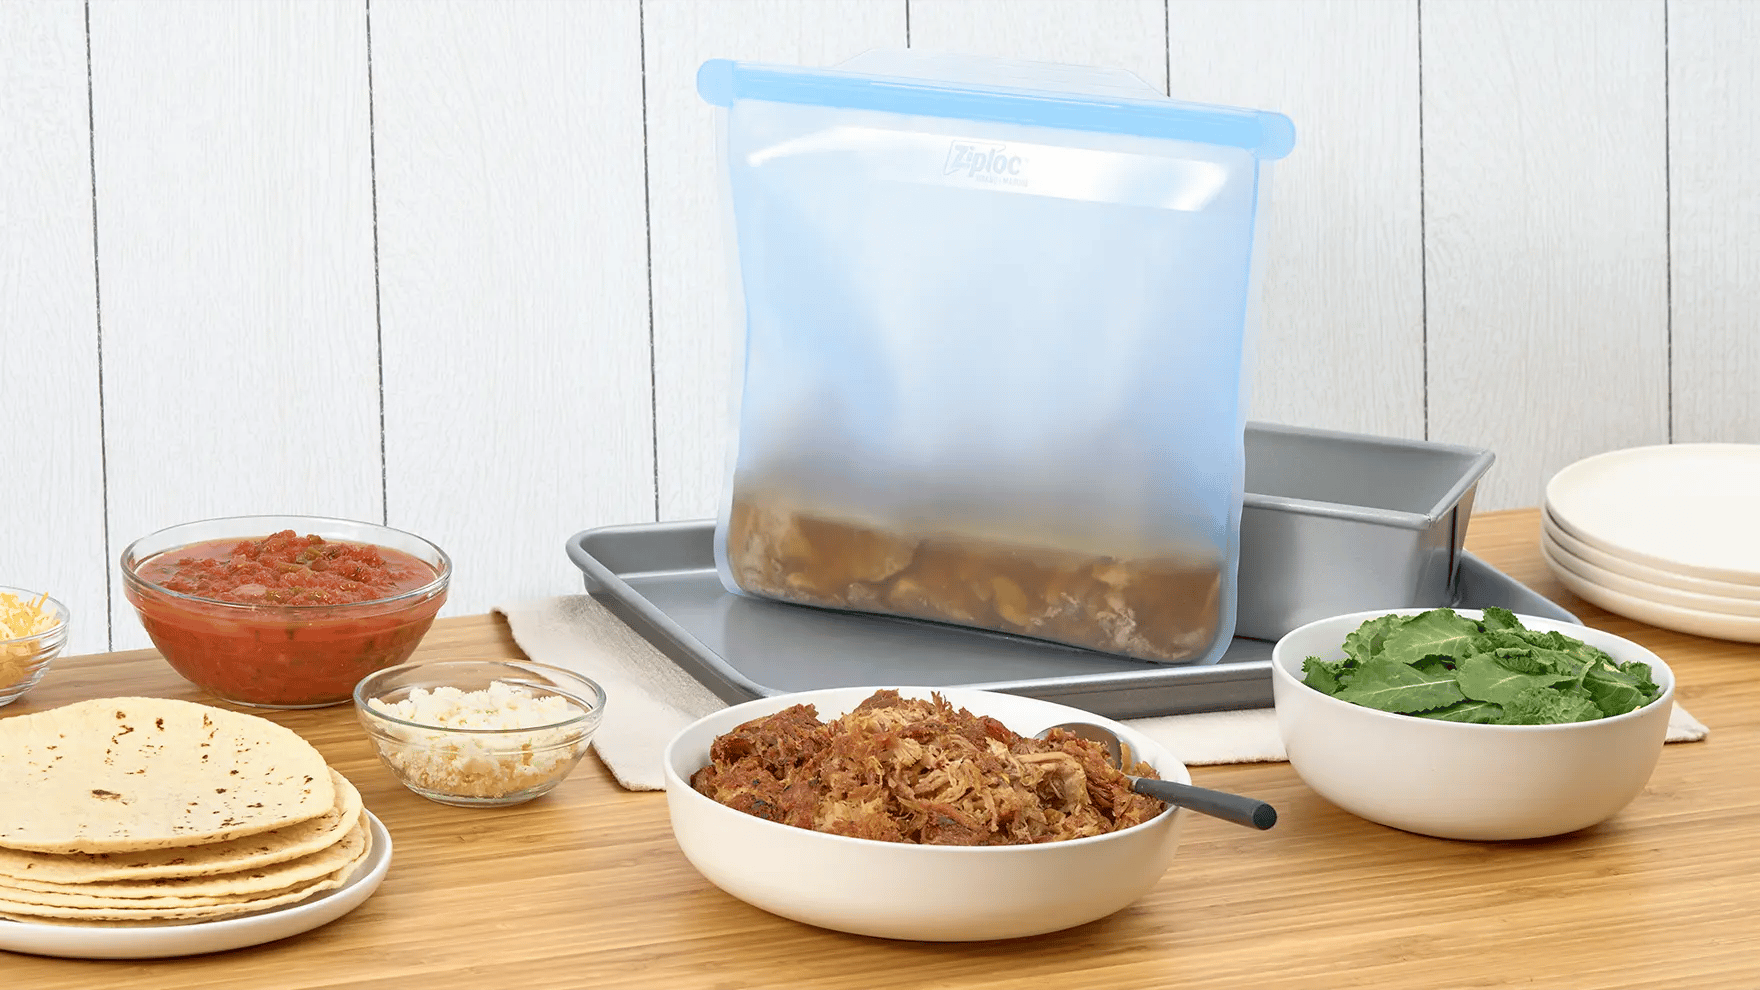 Authentic and crispy pork carnitas served within wam tortillas in a Ziploc® Endurables™ Pouch